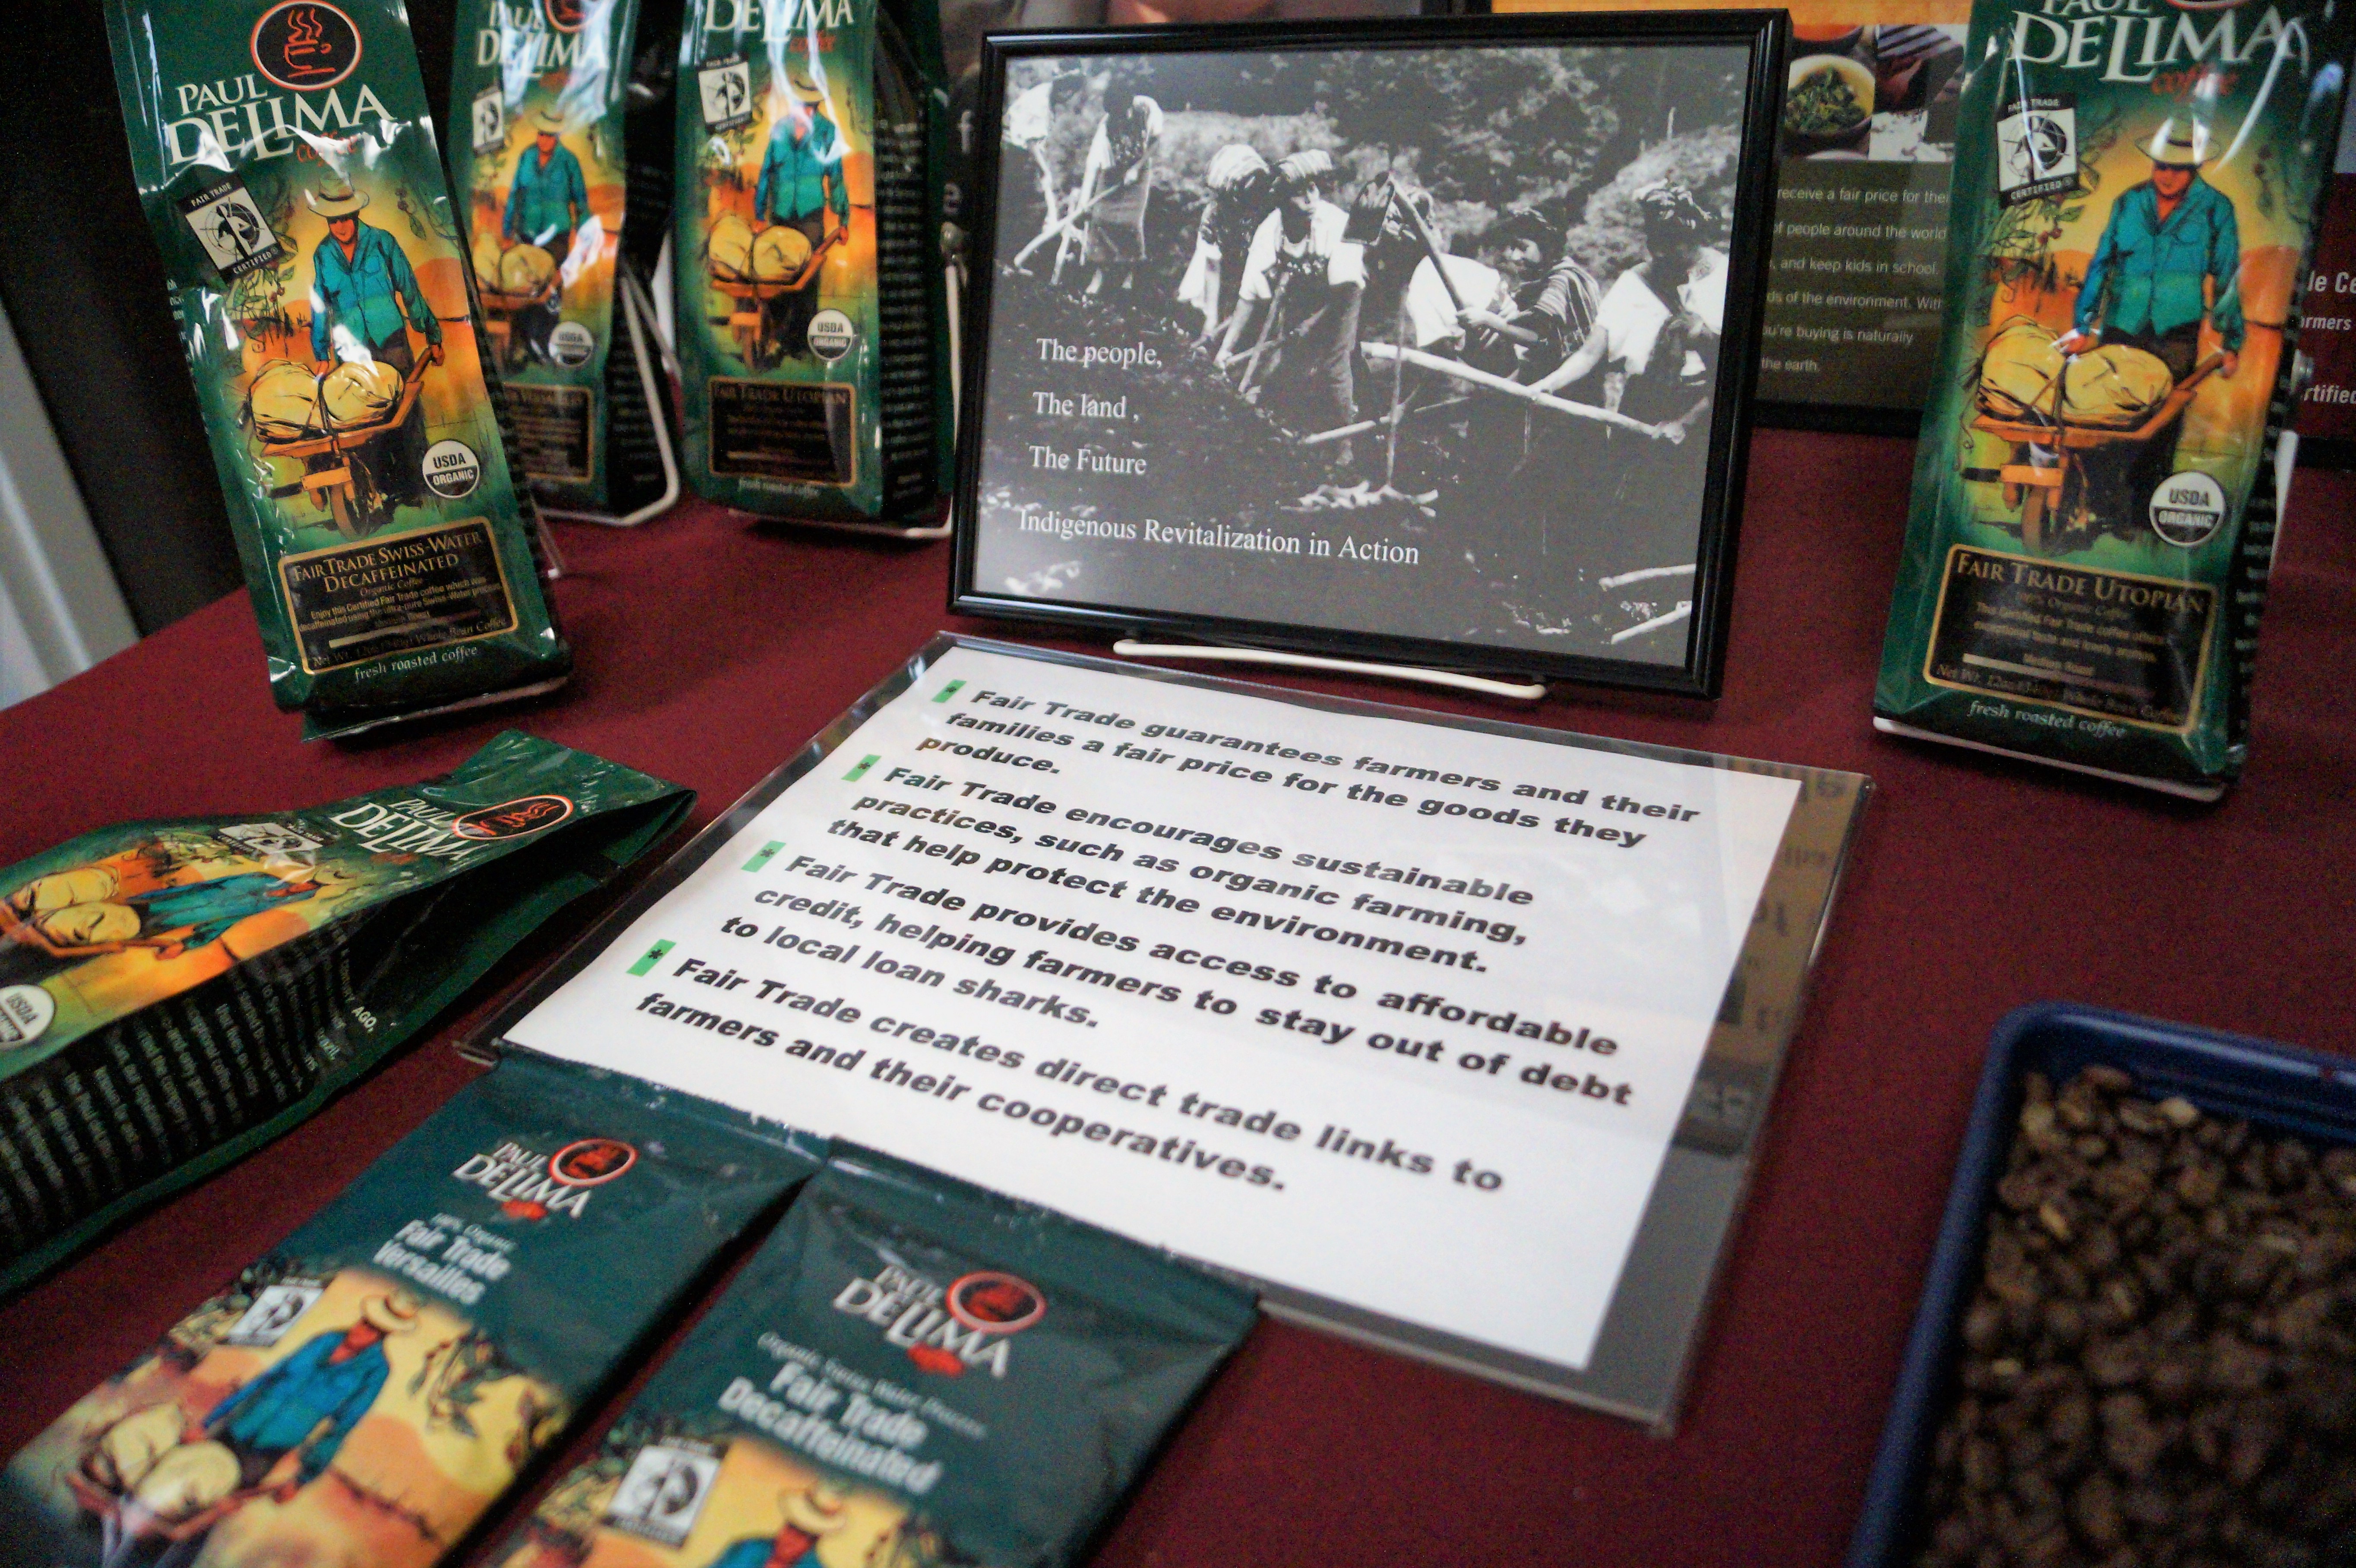 Paul deLima coffee seeks social sustainability of their farmers by participating in the Fair Trade program.